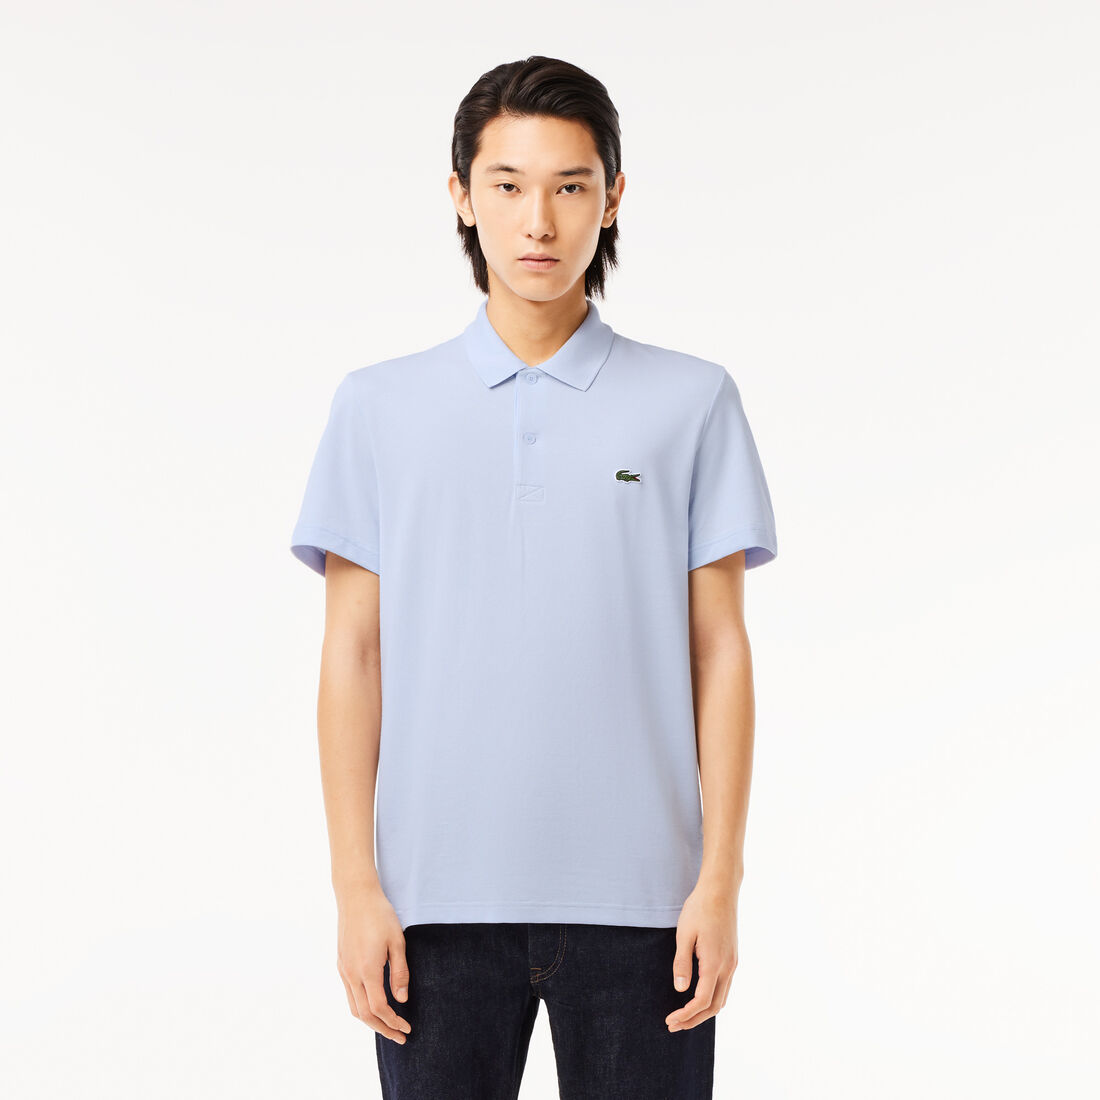 Regular Fit Polyester Cotton Polo Shirt - DH0783-00-J2G